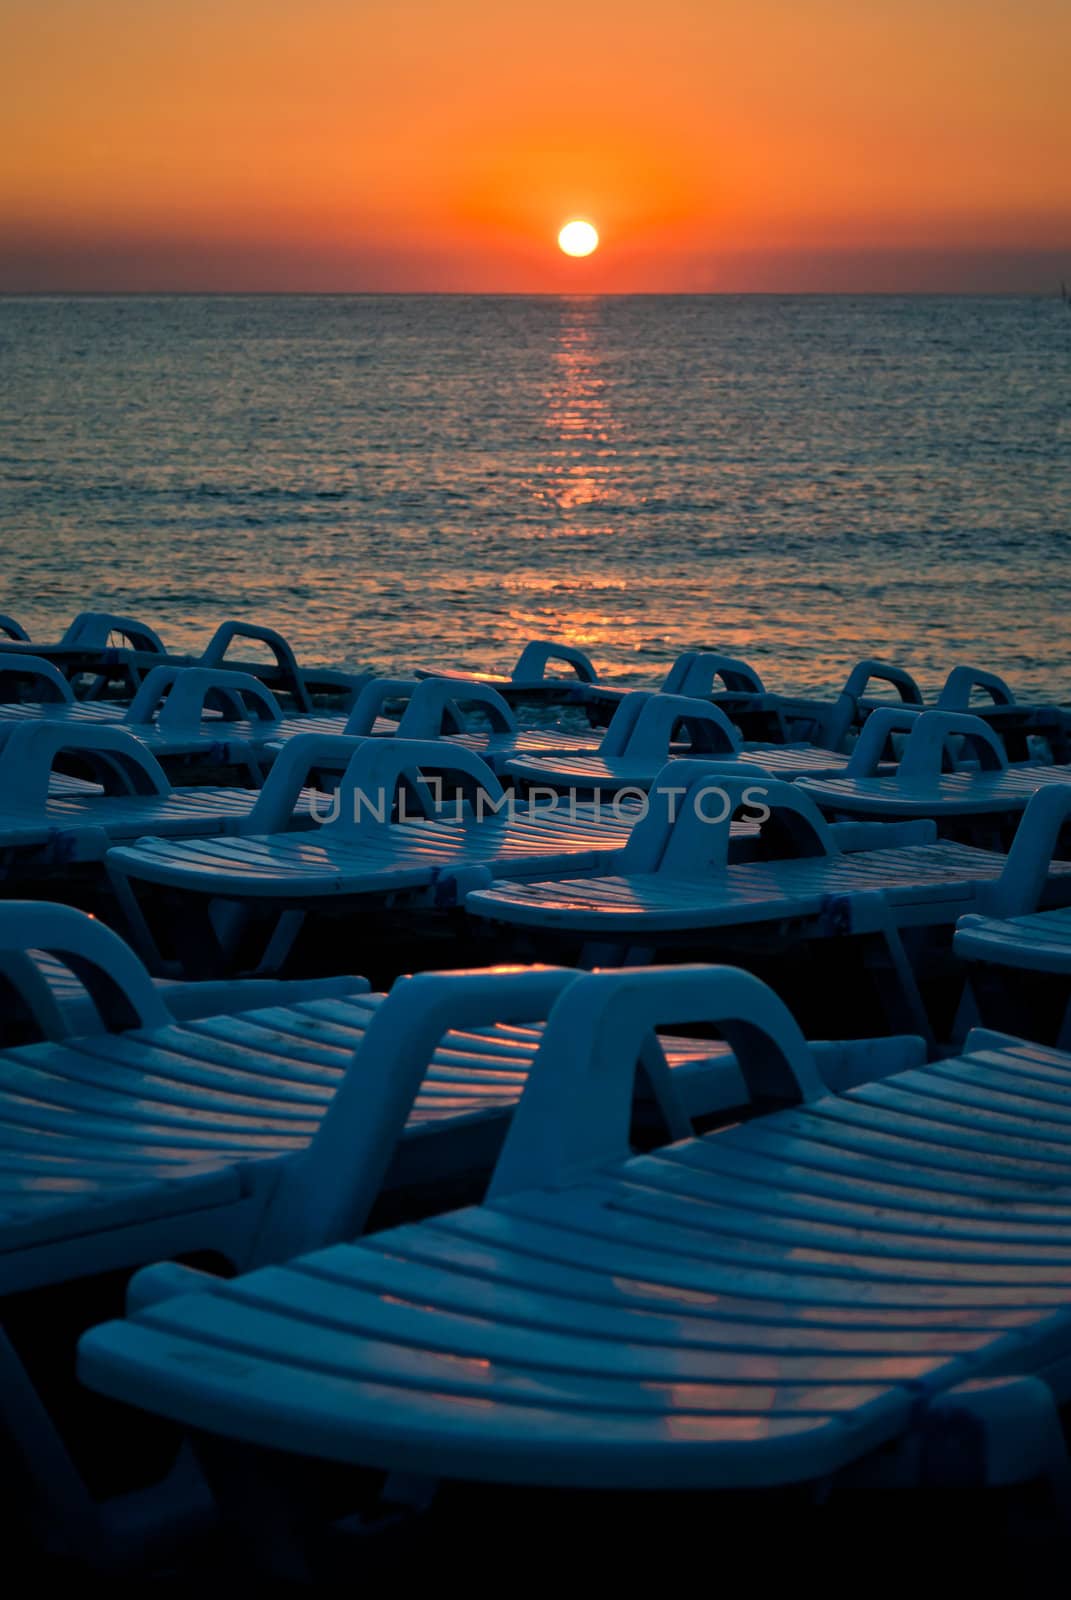 Beach chairs ready for tourists by betterinall